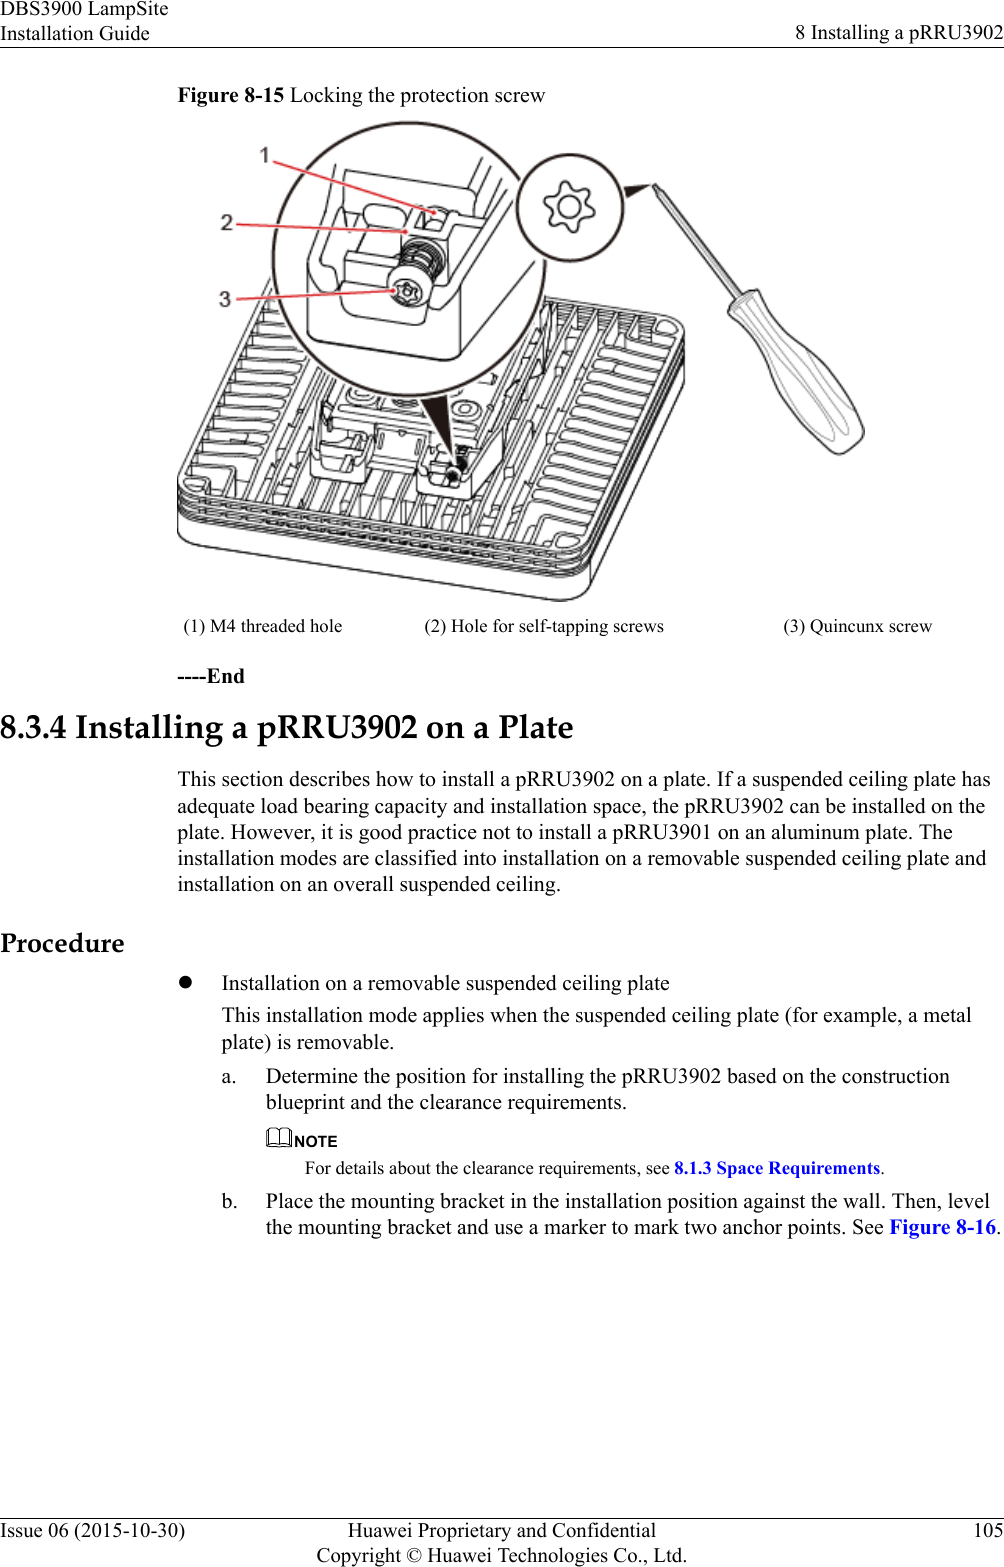 Figure 8-15 Locking the protection screw(1) M4 threaded hole (2) Hole for self-tapping screws (3) Quincunx screw----End8.3.4 Installing a pRRU3902 on a PlateThis section describes how to install a pRRU3902 on a plate. If a suspended ceiling plate hasadequate load bearing capacity and installation space, the pRRU3902 can be installed on theplate. However, it is good practice not to install a pRRU3901 on an aluminum plate. Theinstallation modes are classified into installation on a removable suspended ceiling plate andinstallation on an overall suspended ceiling.ProcedurelInstallation on a removable suspended ceiling plateThis installation mode applies when the suspended ceiling plate (for example, a metalplate) is removable.a. Determine the position for installing the pRRU3902 based on the constructionblueprint and the clearance requirements.NOTEFor details about the clearance requirements, see 8.1.3 Space Requirements.b. Place the mounting bracket in the installation position against the wall. Then, levelthe mounting bracket and use a marker to mark two anchor points. See Figure 8-16.DBS3900 LampSiteInstallation Guide 8 Installing a pRRU3902Issue 06 (2015-10-30) Huawei Proprietary and ConfidentialCopyright © Huawei Technologies Co., Ltd.105